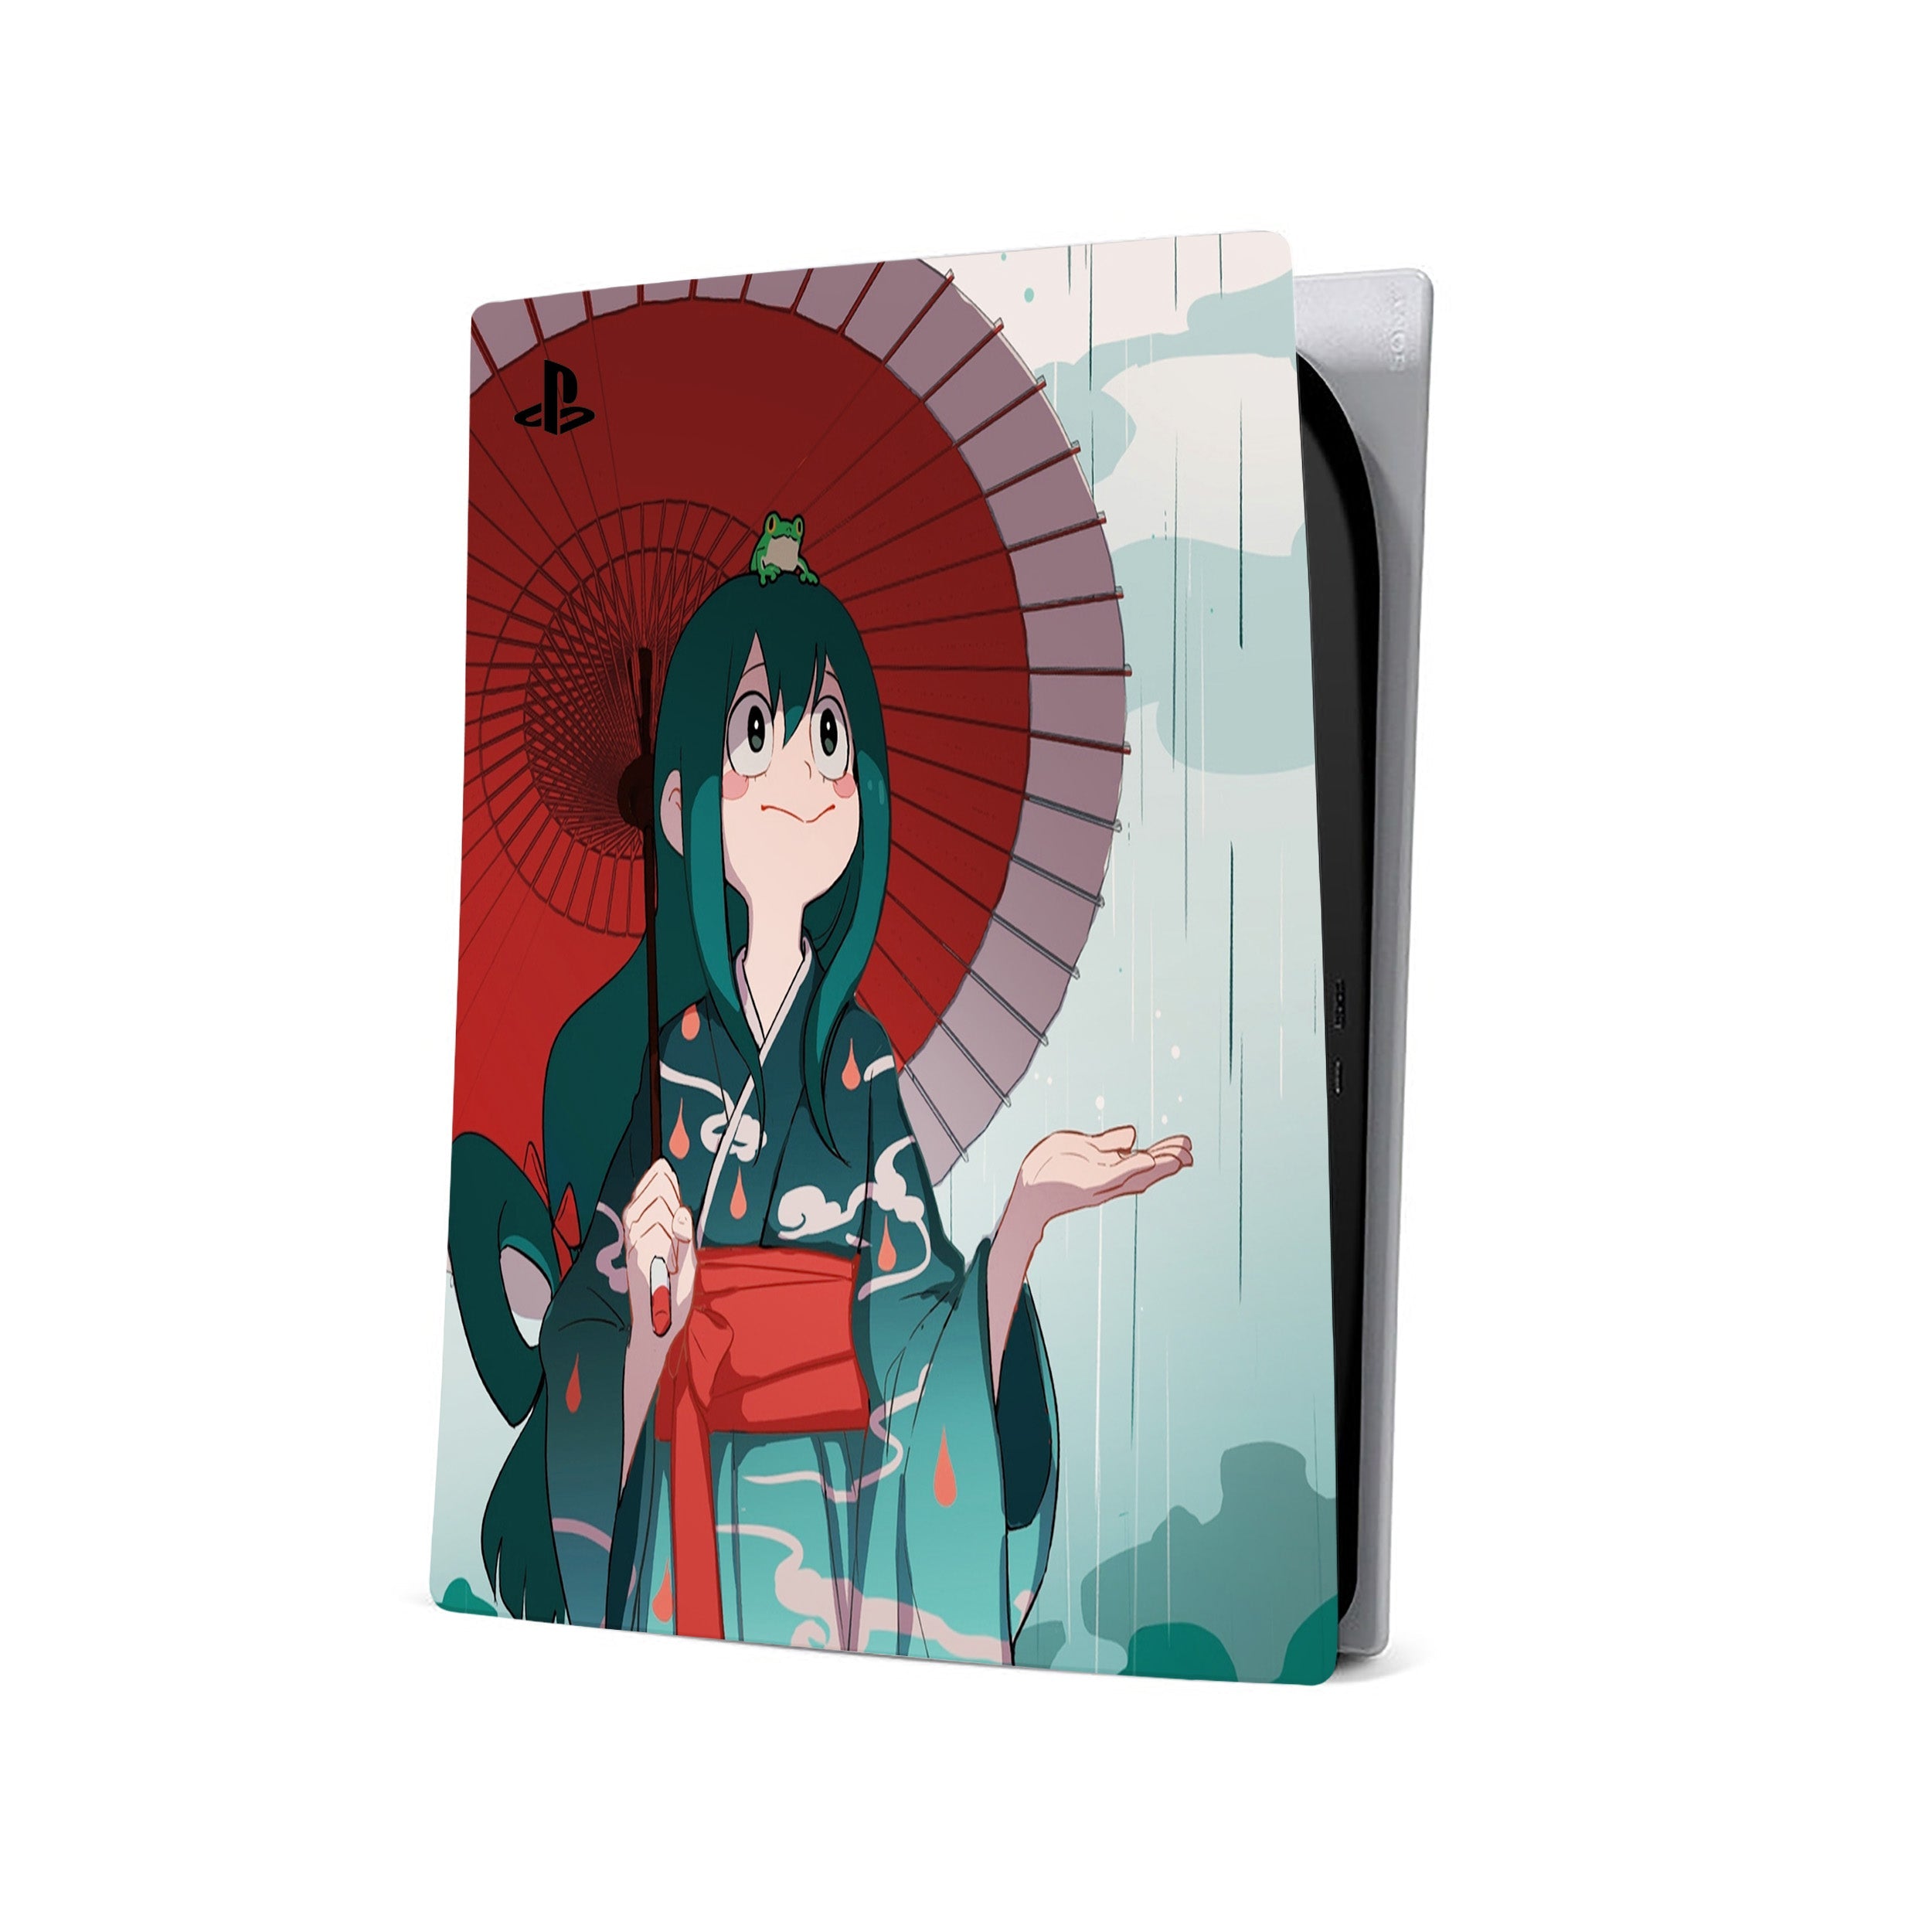 A video game skin featuring a My Hero Academia Tsuyu Asui design for the PS5.